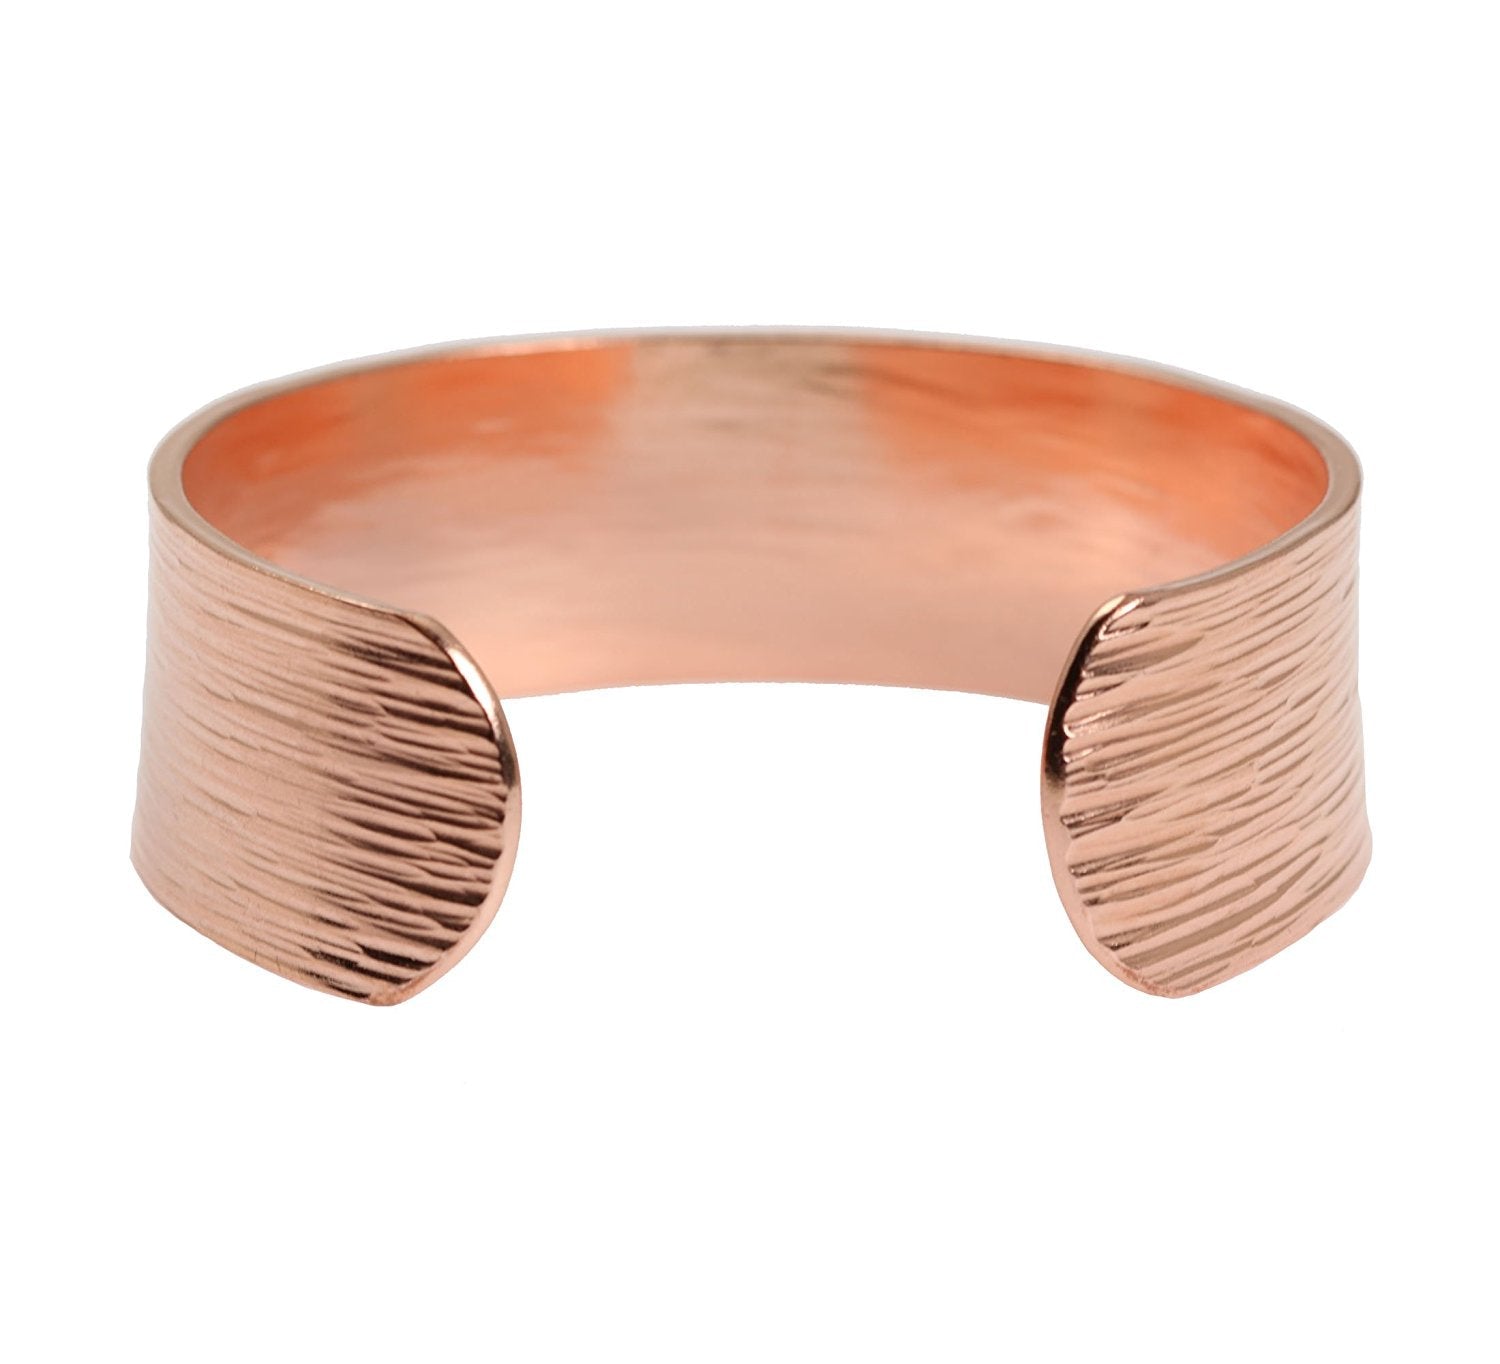 Opening 3/4 Inch Wide Chased Copper Bark Cuff Bracelet